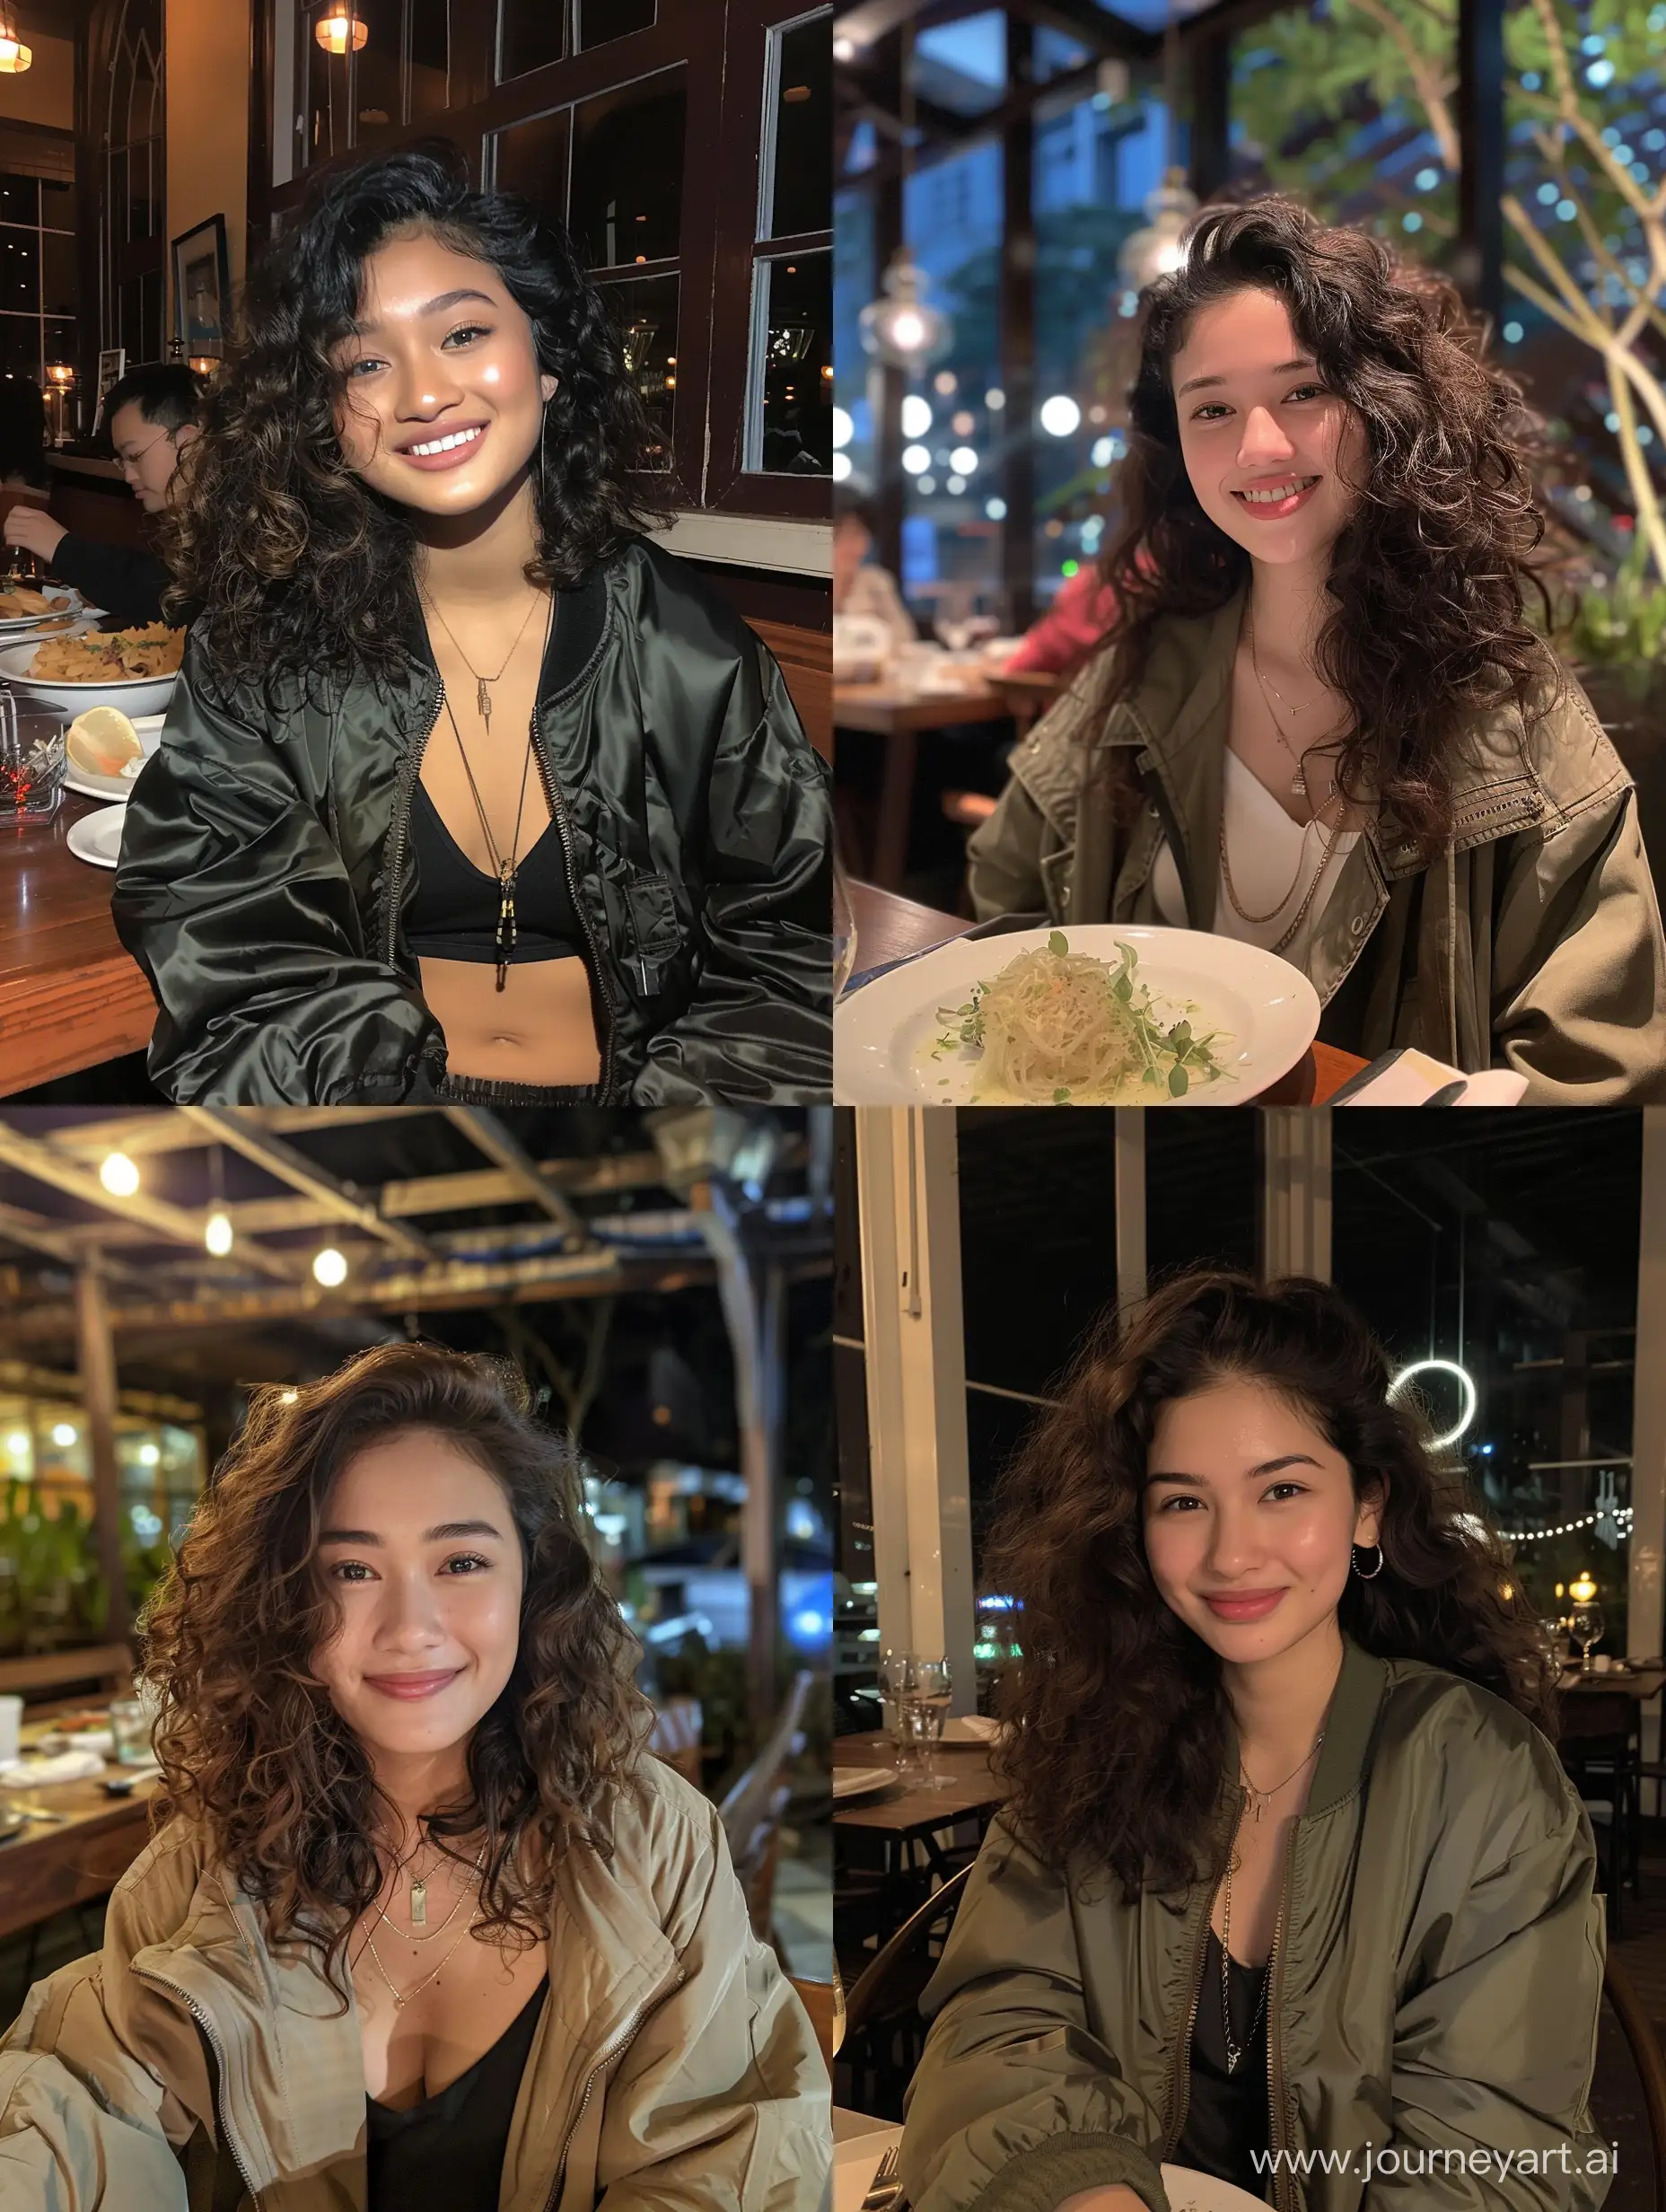 Phone photo of attractive Indonesian girl on our first date, curly hair wearing cool jacket, dinner at fancy restaurant out door, posted on snapchat, brunette, casual grin